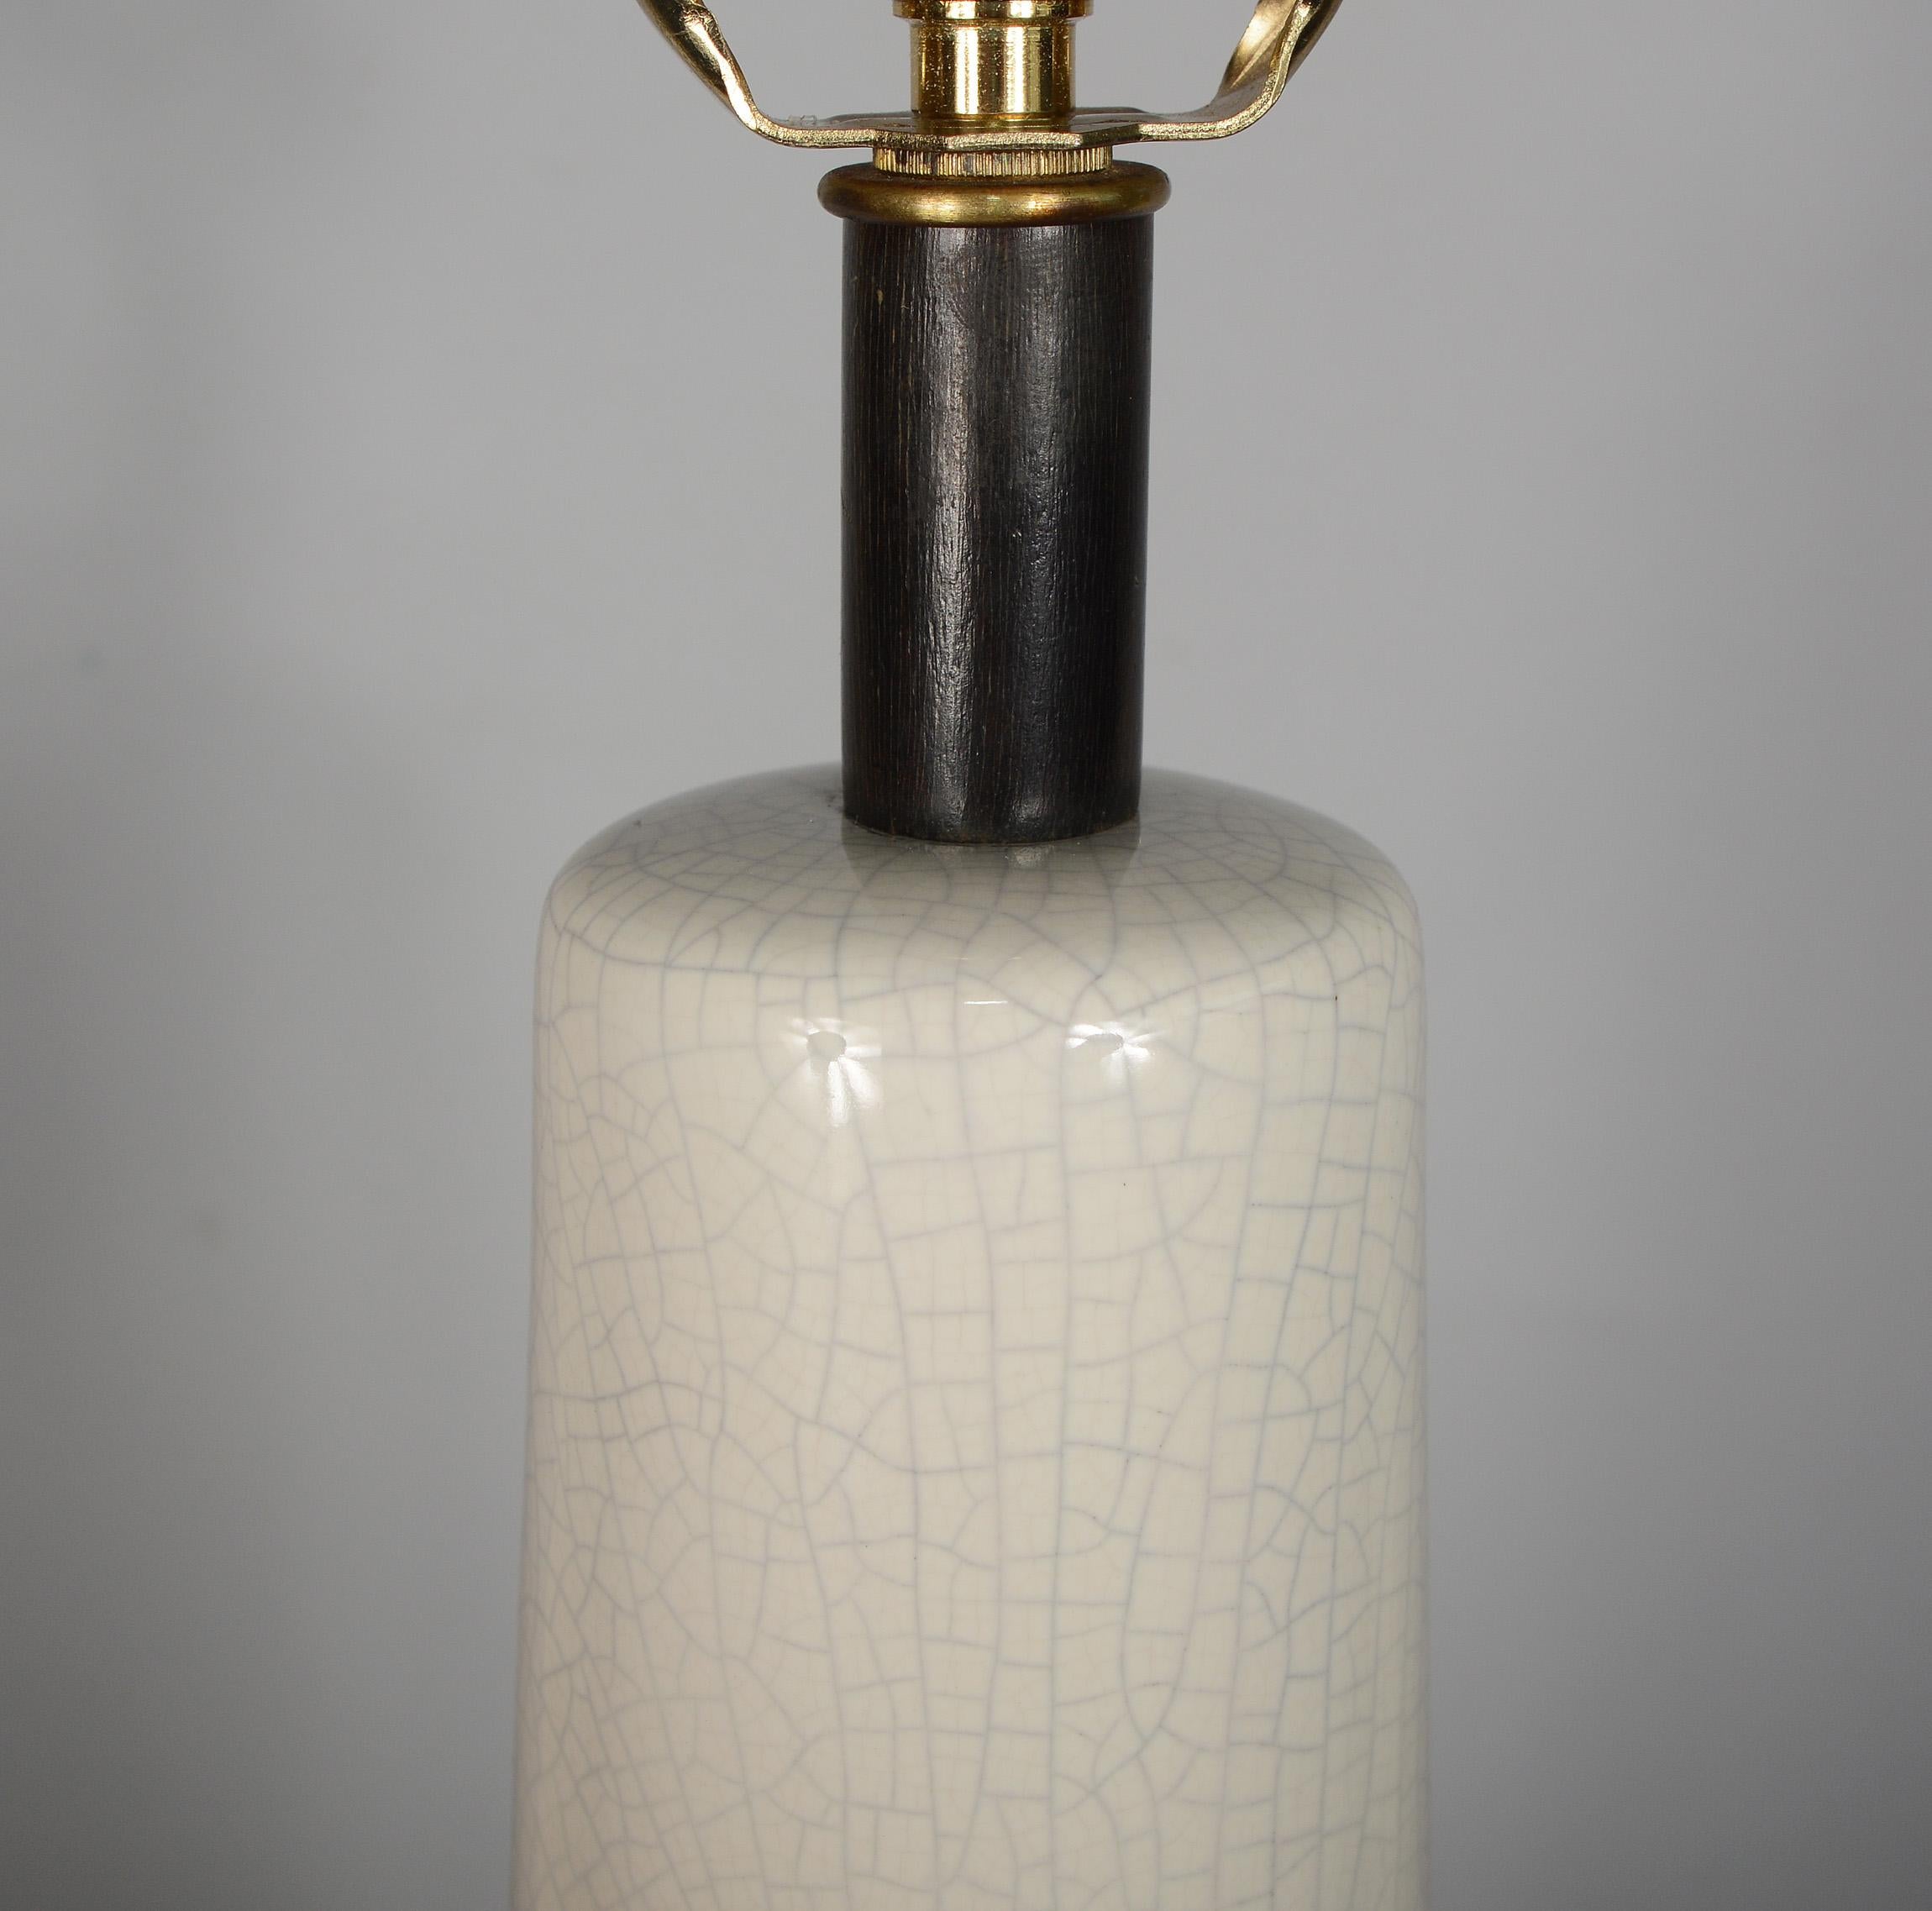 Modernist Asian Style Table Lamp with Crackle Glaze In Good Condition For Sale In San Mateo, CA